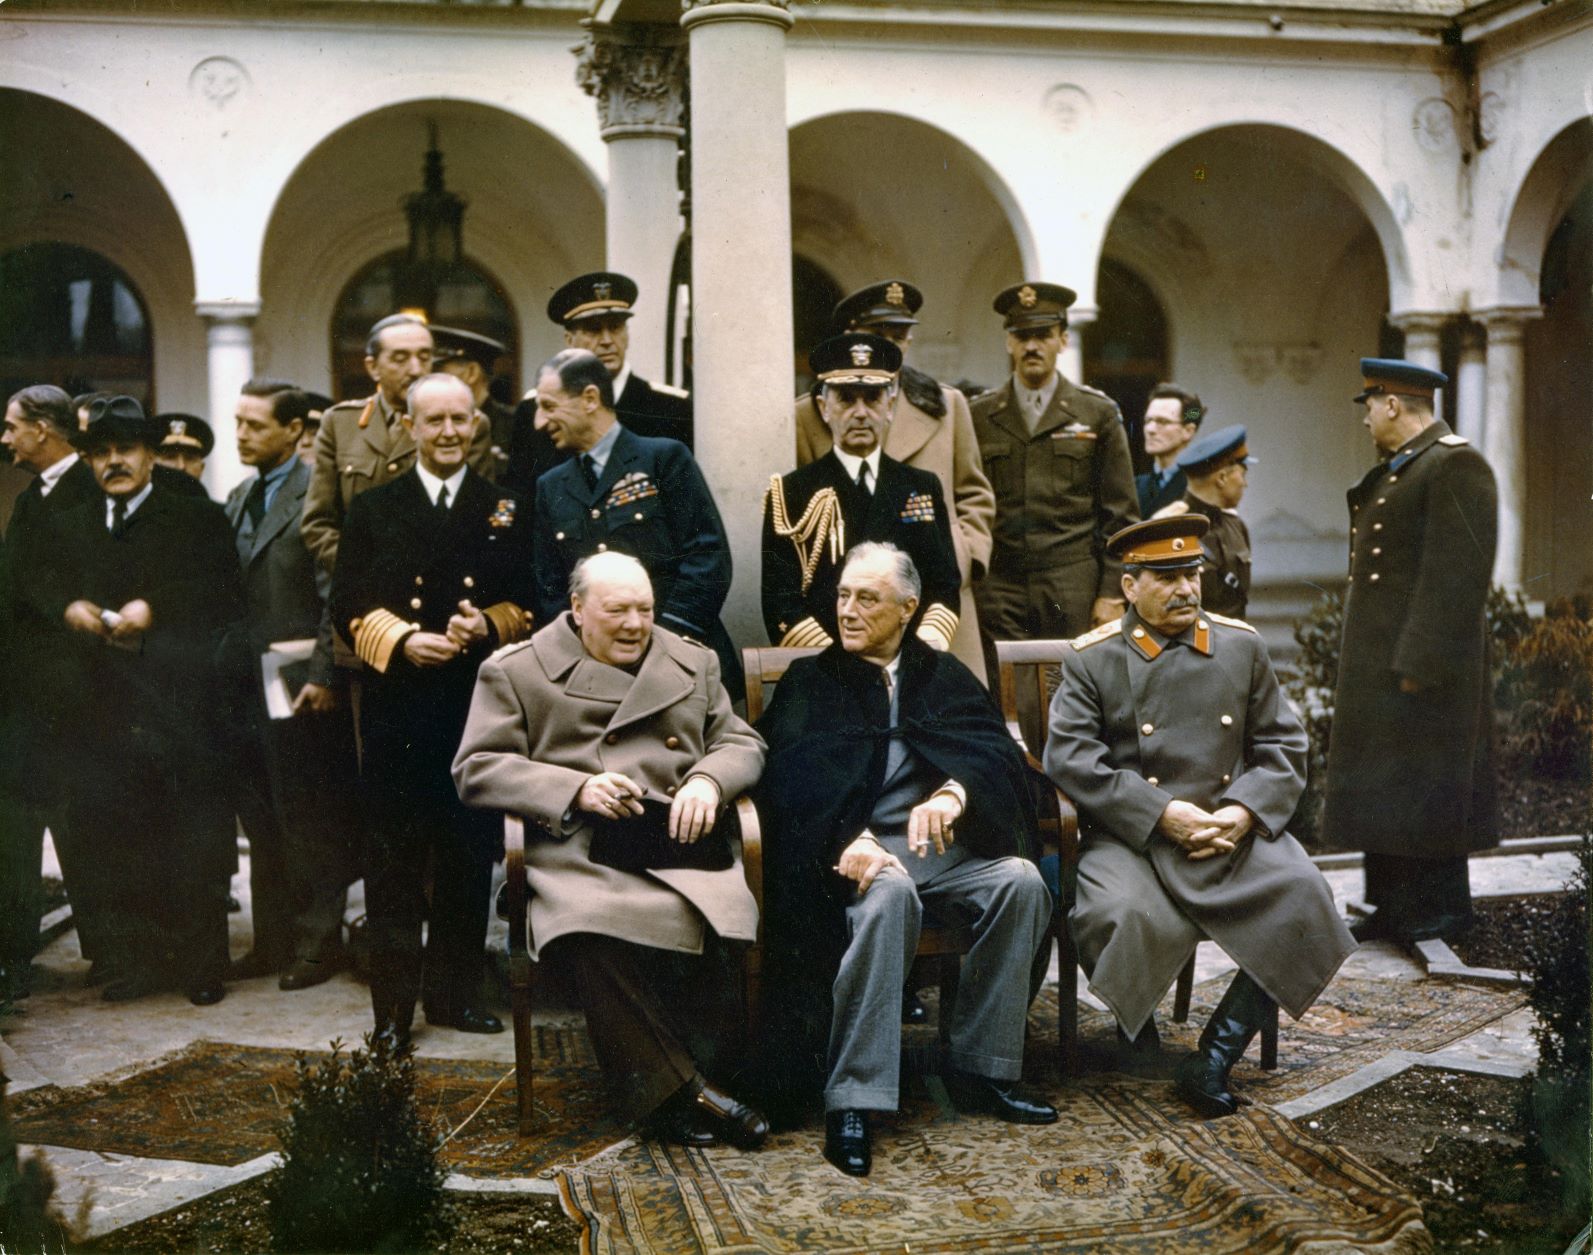 Photograph of the 'Big Three' at Yalta; British Prime Minister Winston Churchill, U.S. President Franklin D. Roosevelt and Soviet Premier Marshal Josef Stalin, flanked by their respective military chiefs and political advisors, at the Livadia Palace during the Yalta Conference, 4 February 1945.